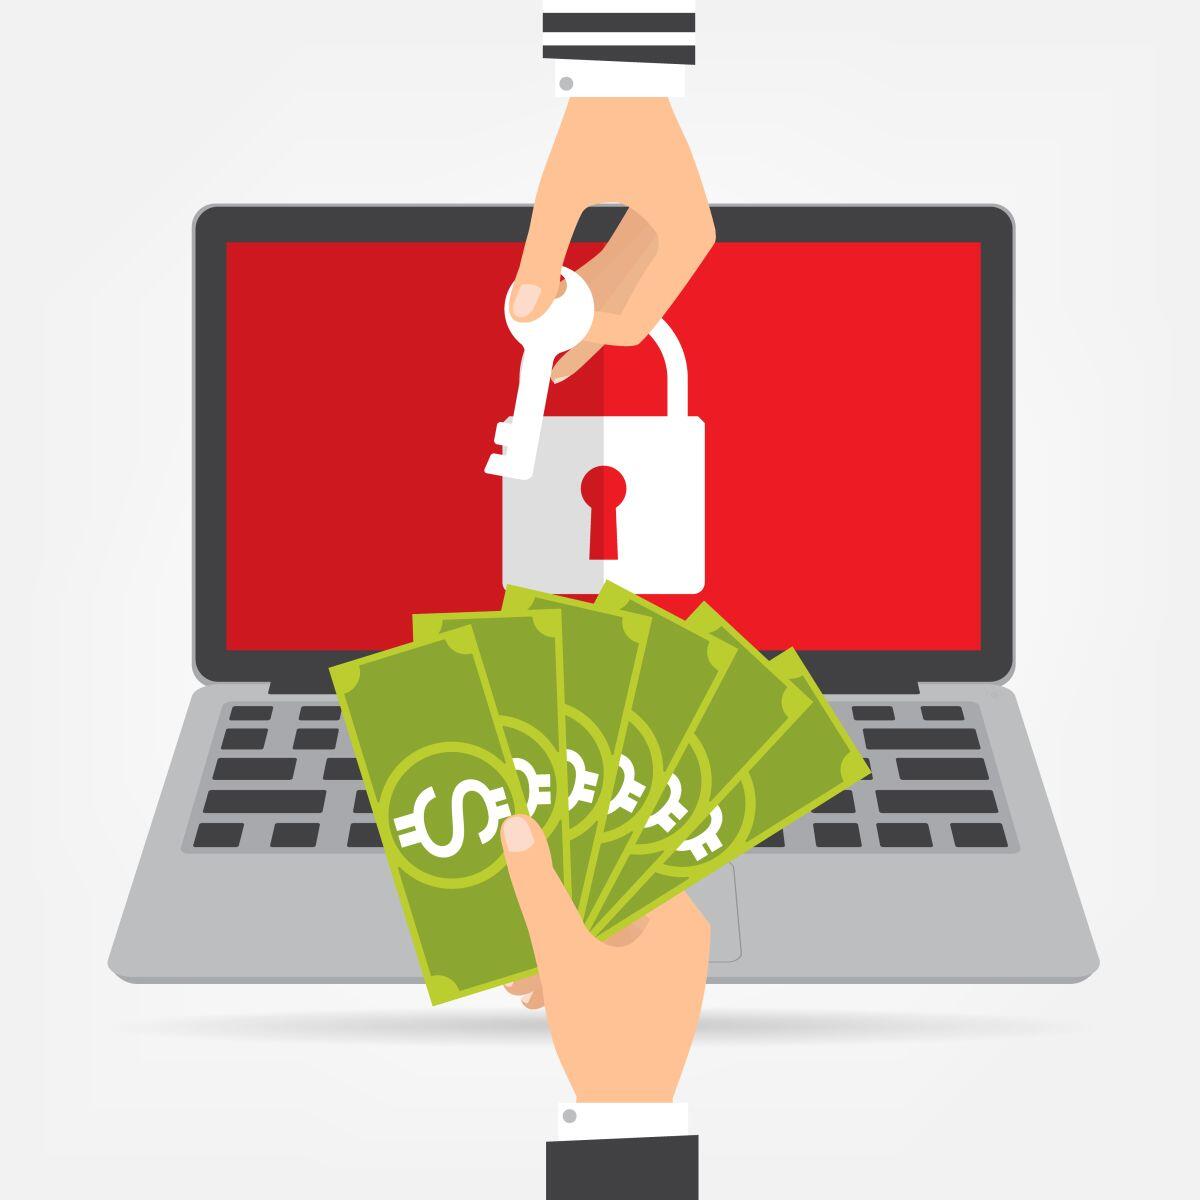 protect ransomware